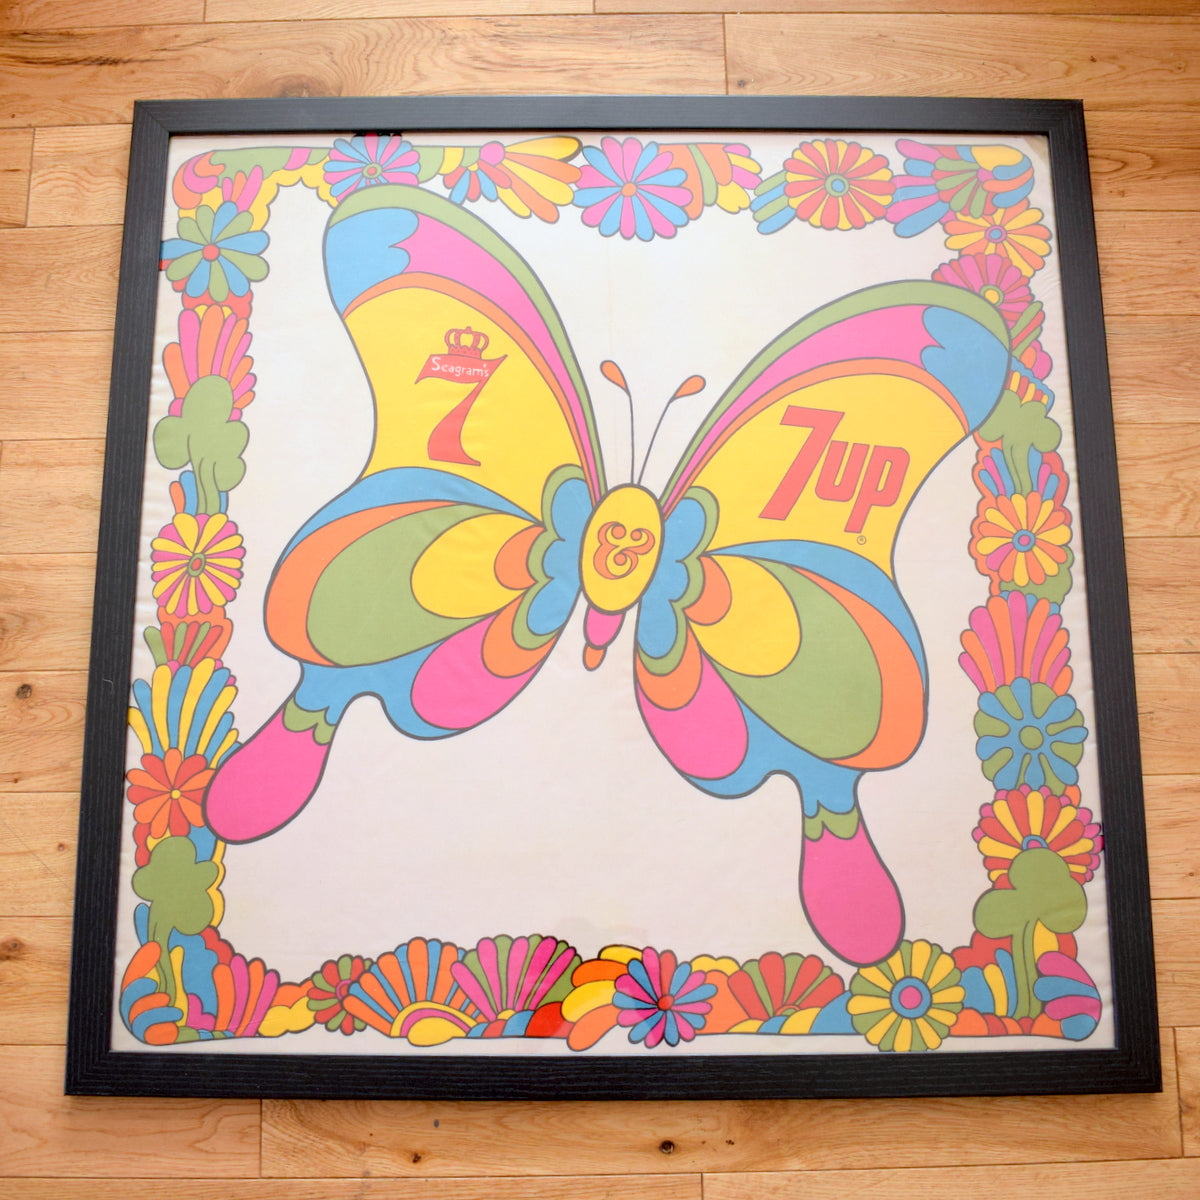 Vintage 1960s Rare American 7UP / Seagrams Framed Butterfly Scarf